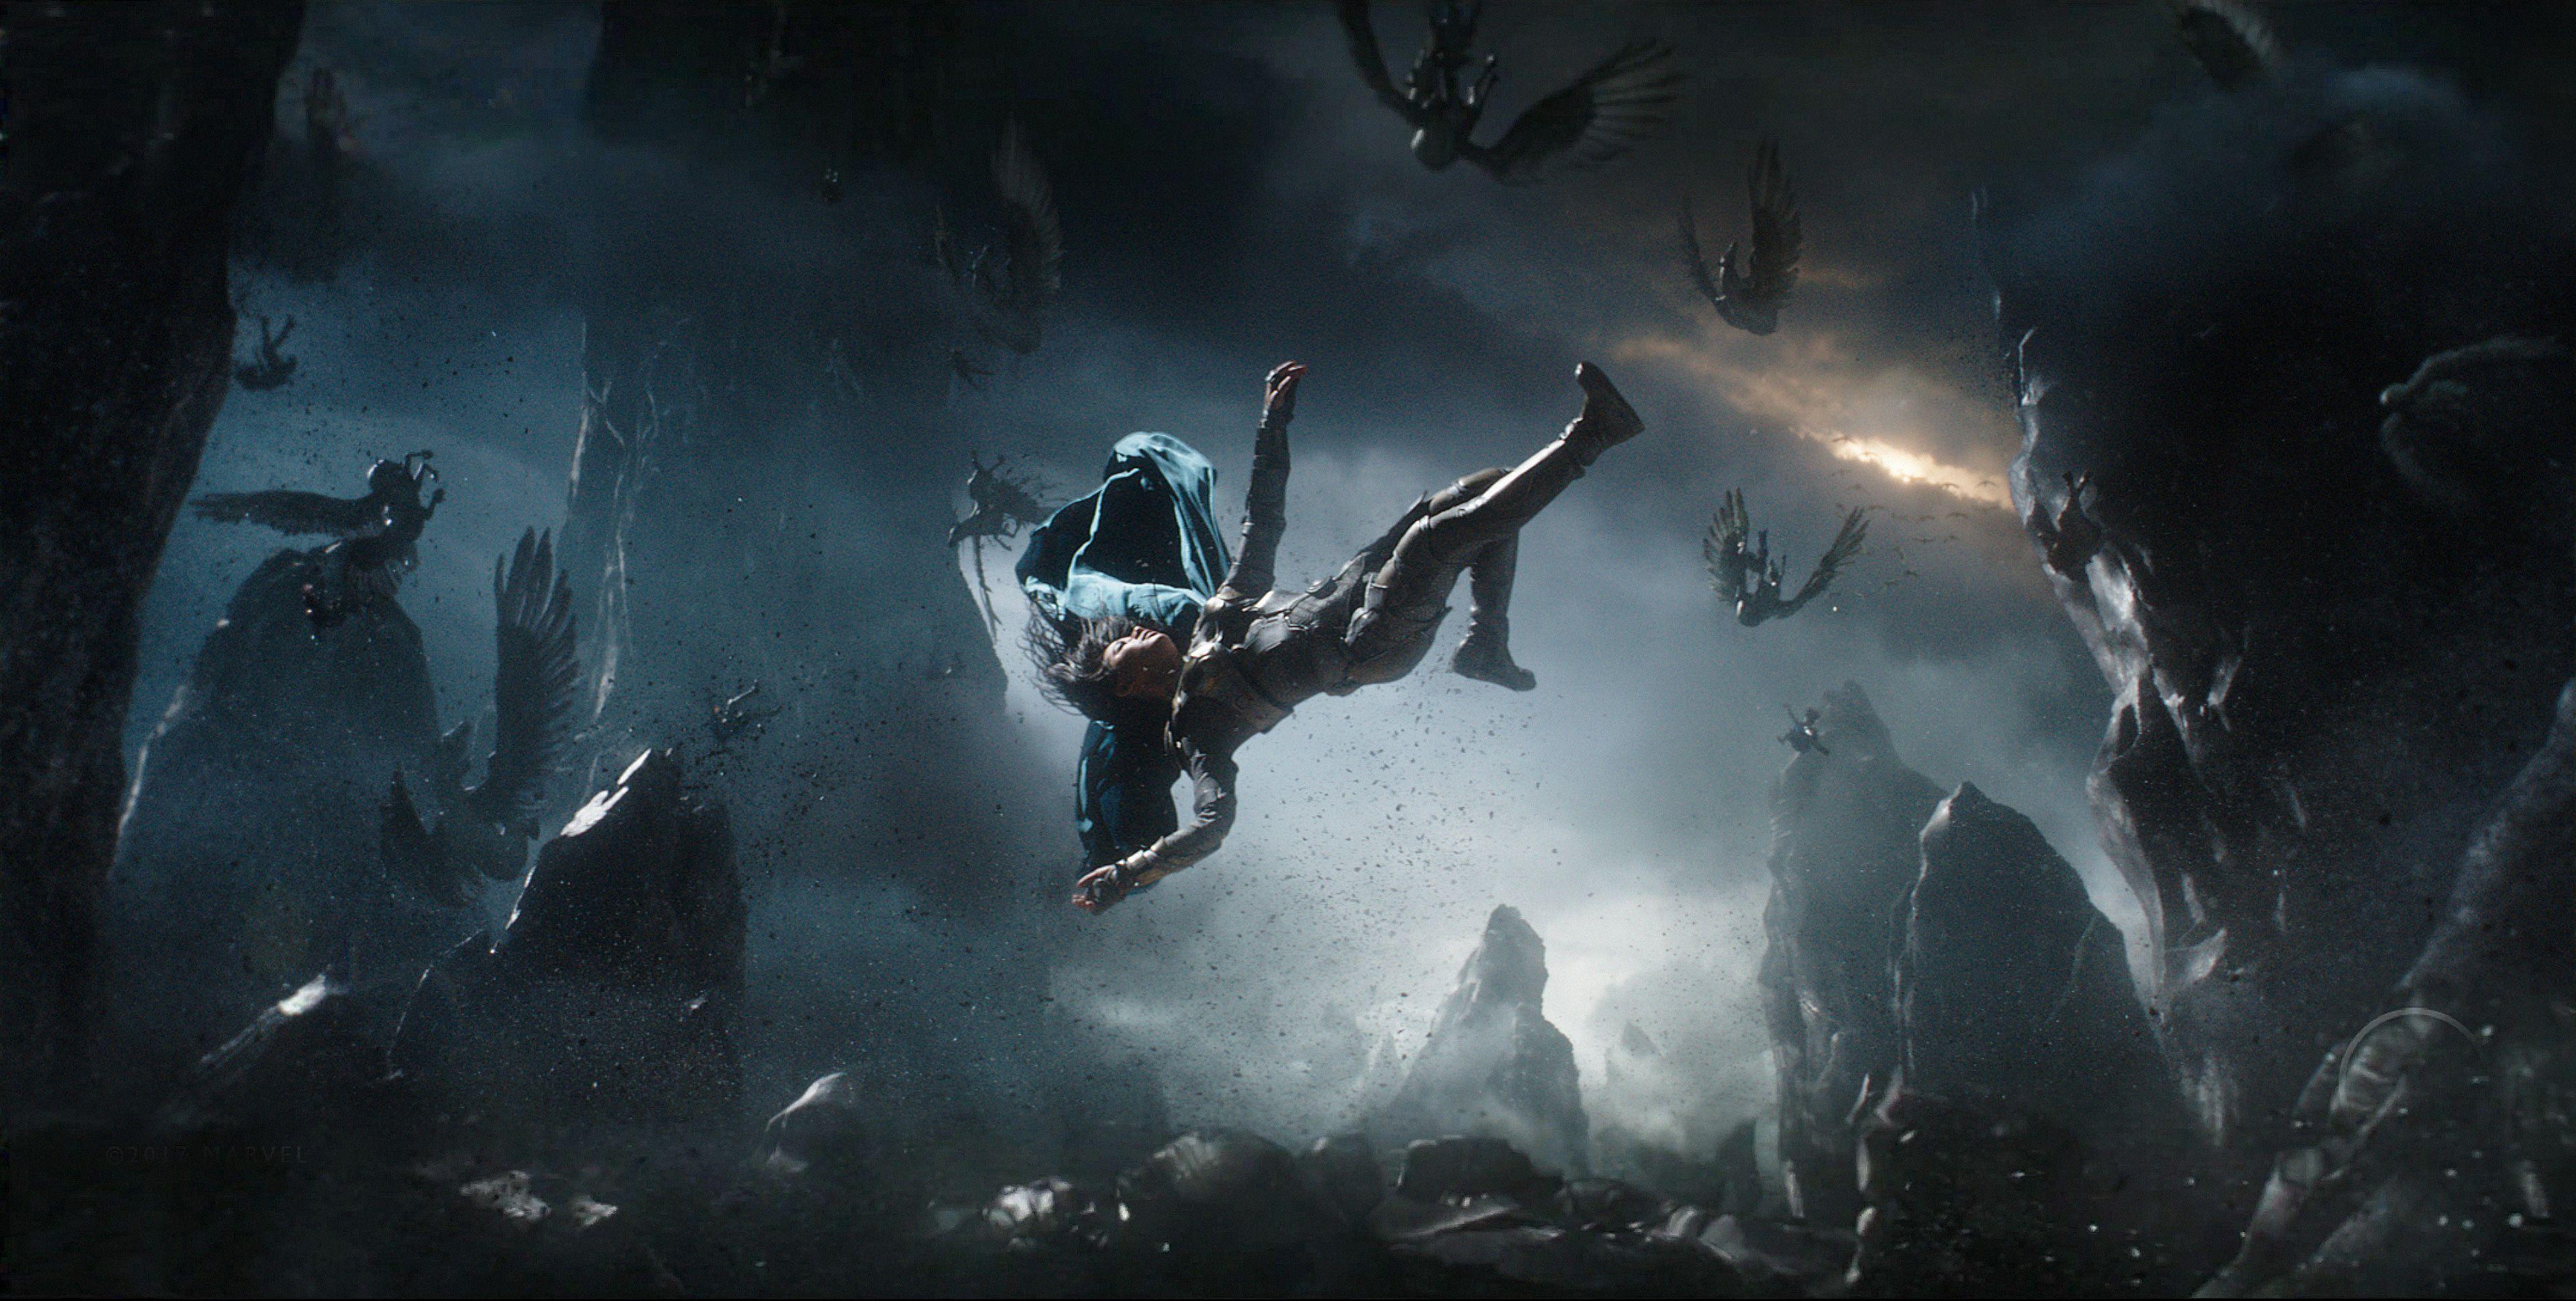 Another IMAX wallpaper from the Valkyrie flashback scene in Thor